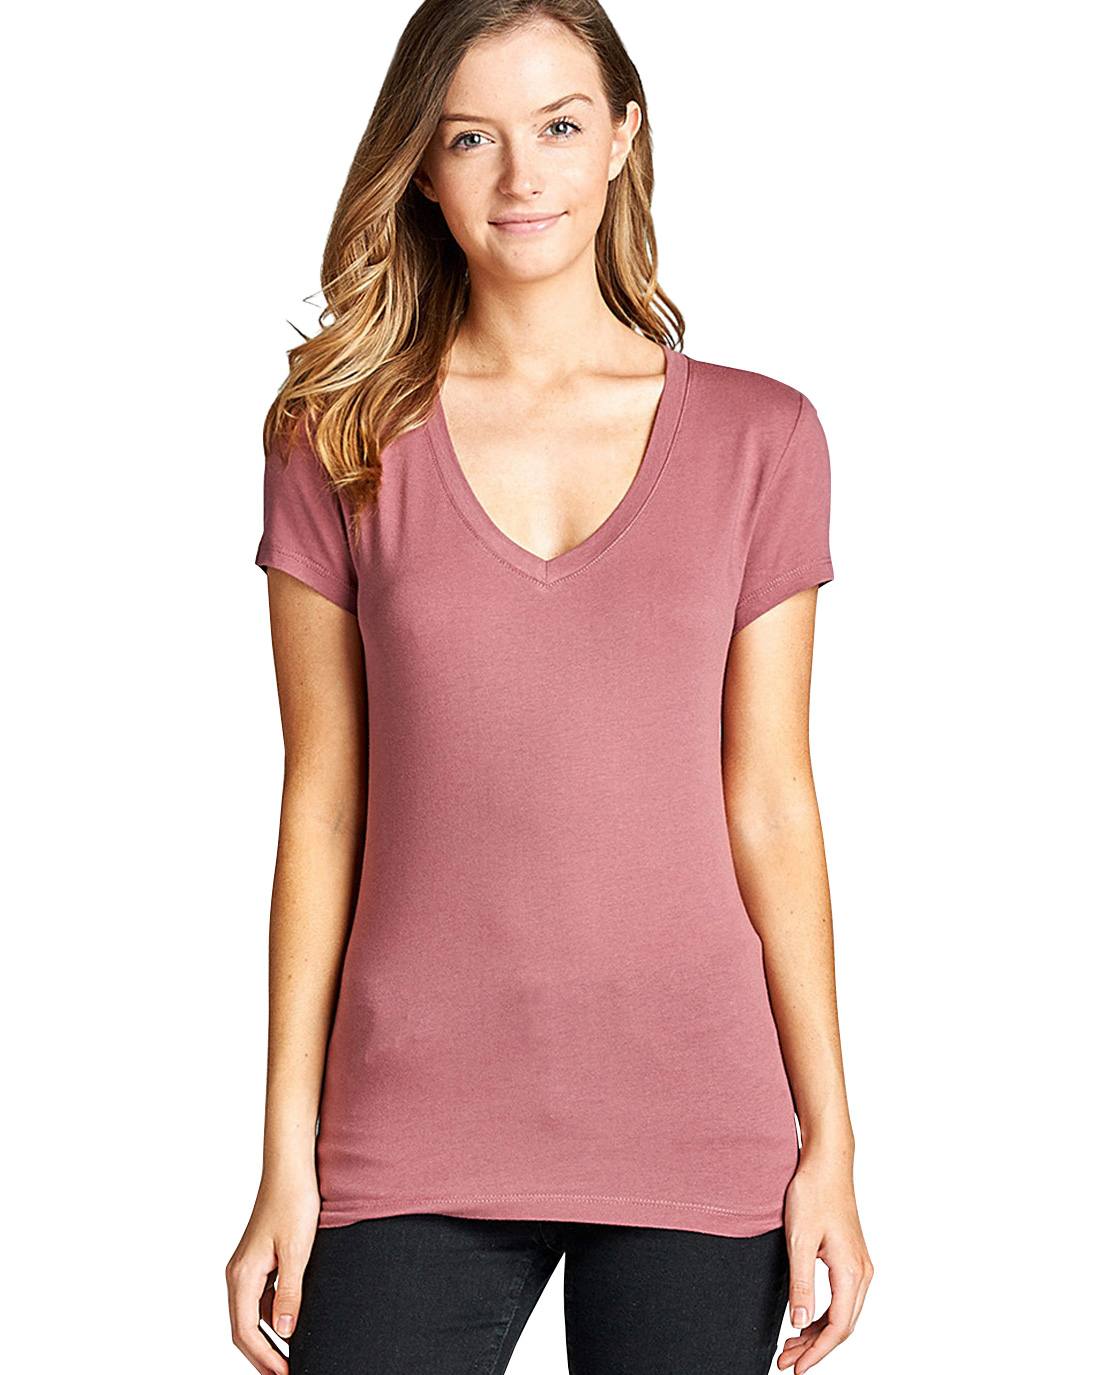 Stretchy short sleeves top